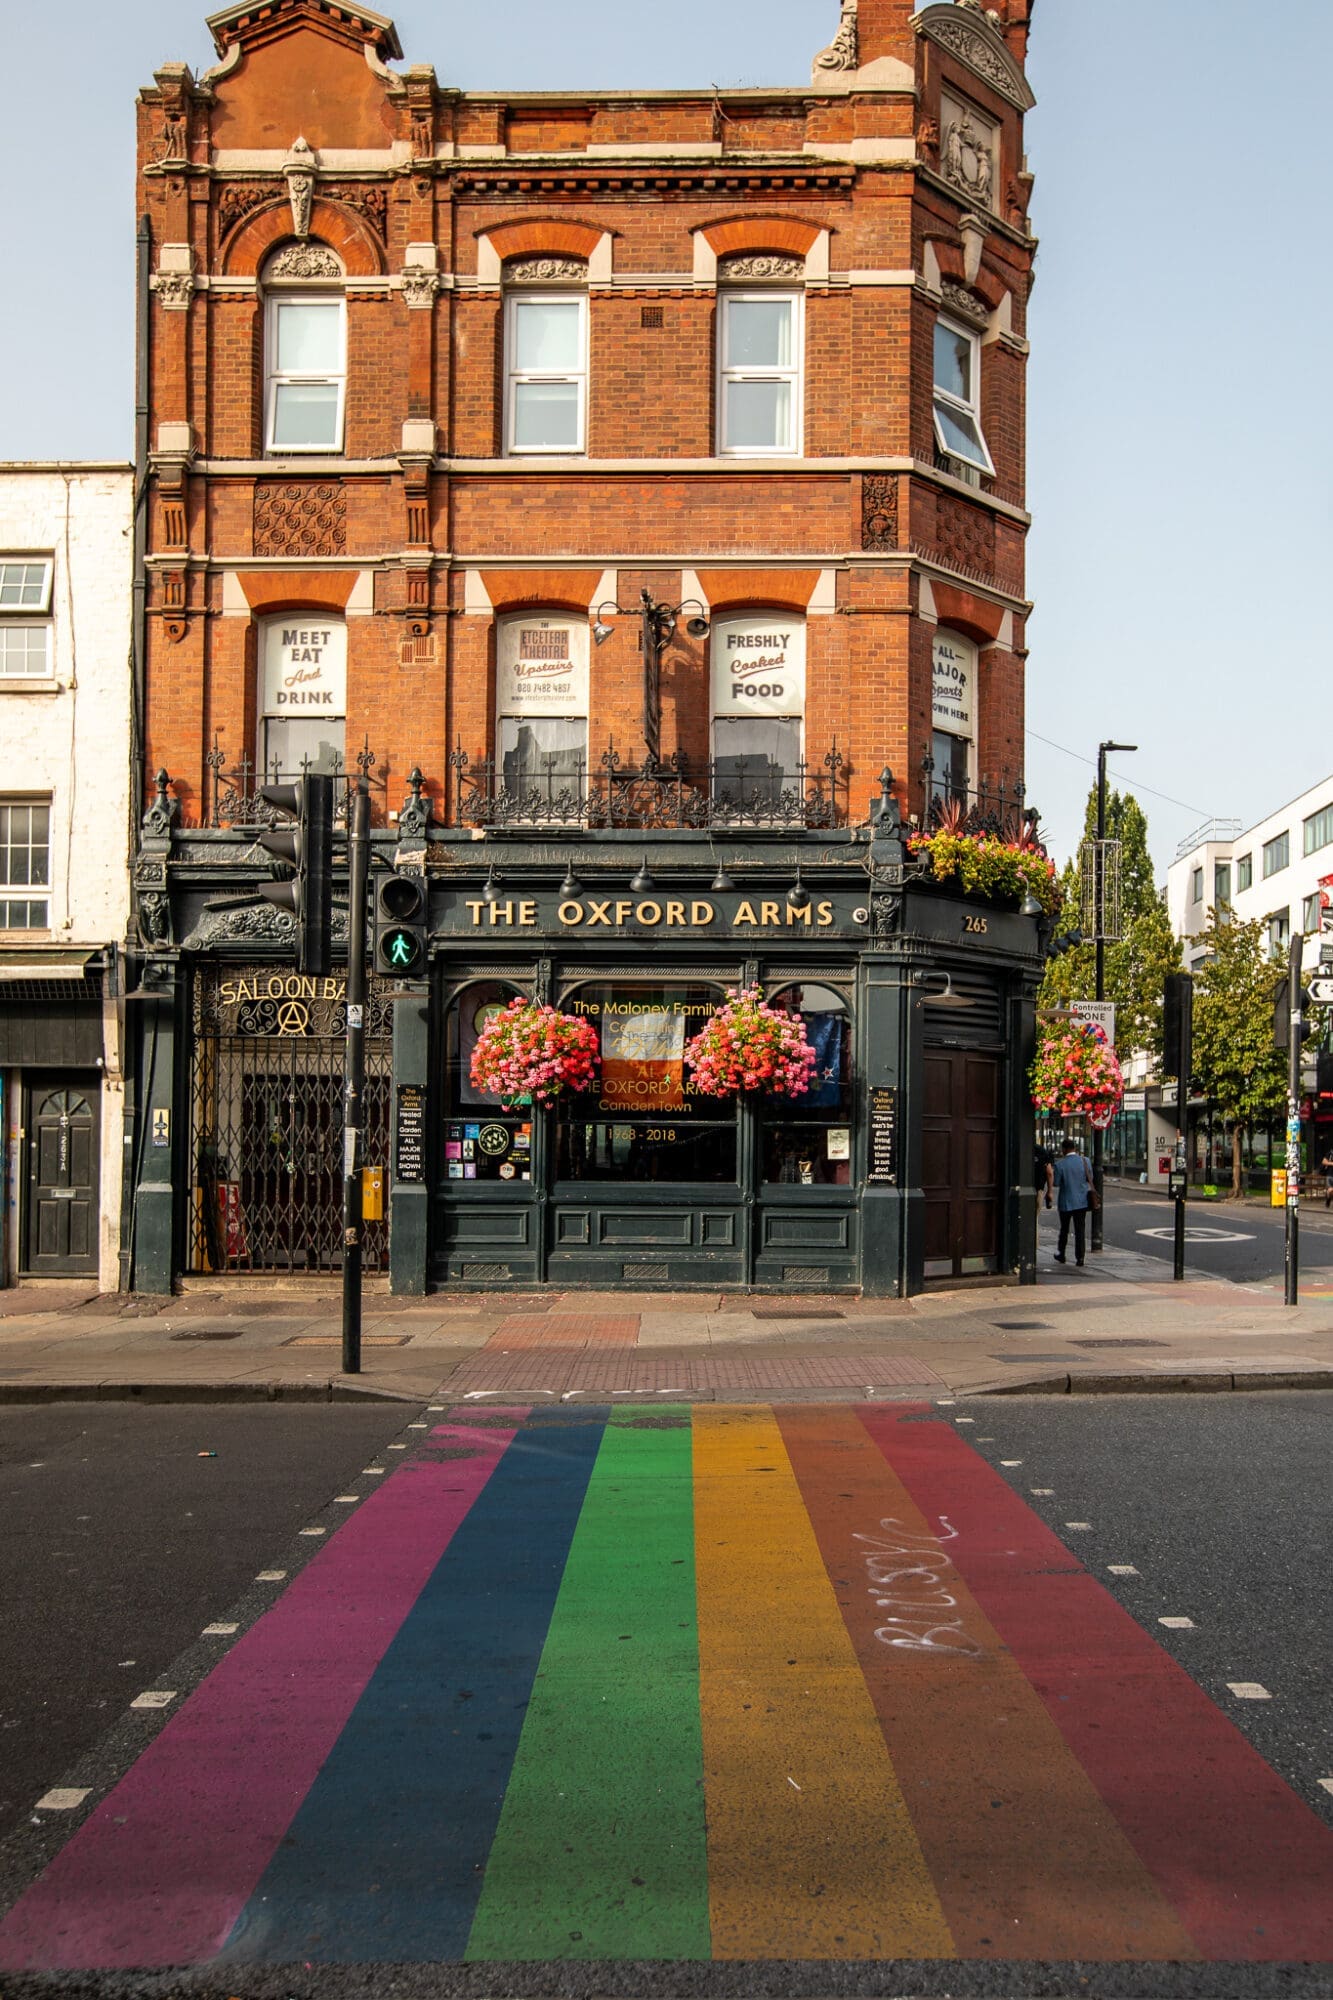 The Oxford Arms, a black pub with colourful hanging flower baskets, behind a rainbow painted "pride" zebra crossing